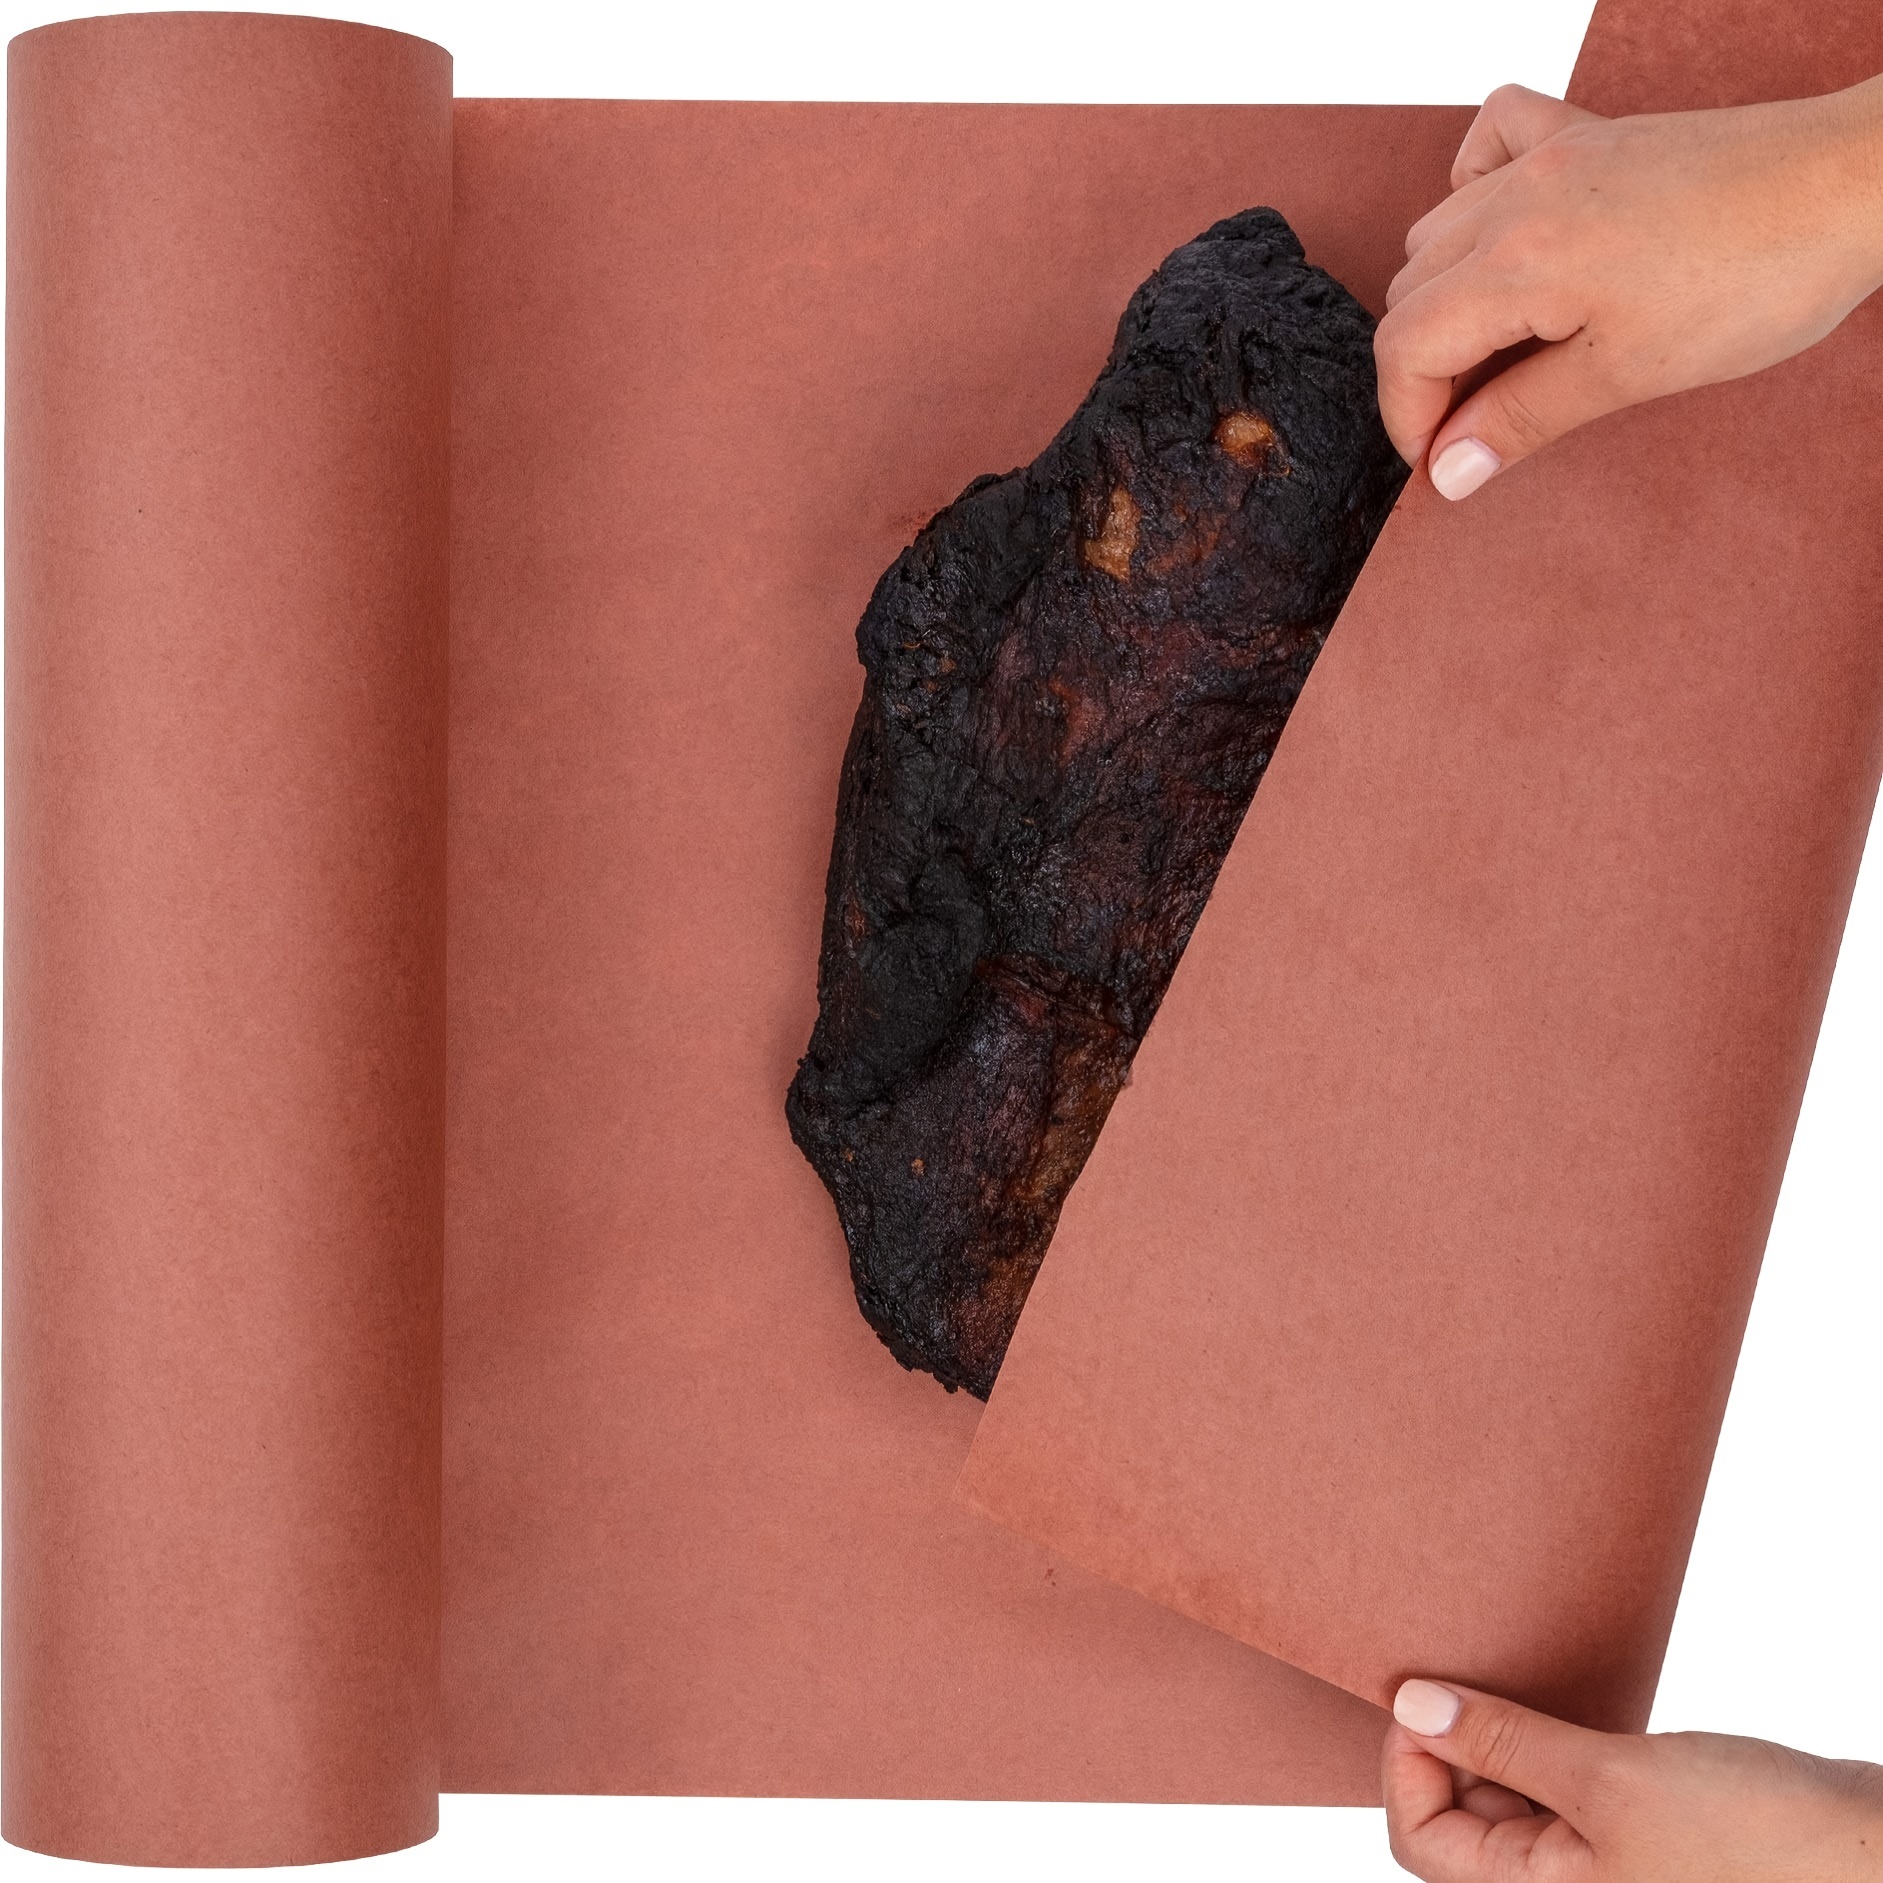 Pink Butcher Paper, Butcher Paper For Smoking Brisket 17.4inx33feet  (393.7in) , Peach Butcher Paper For Smoking Meat, BBQ